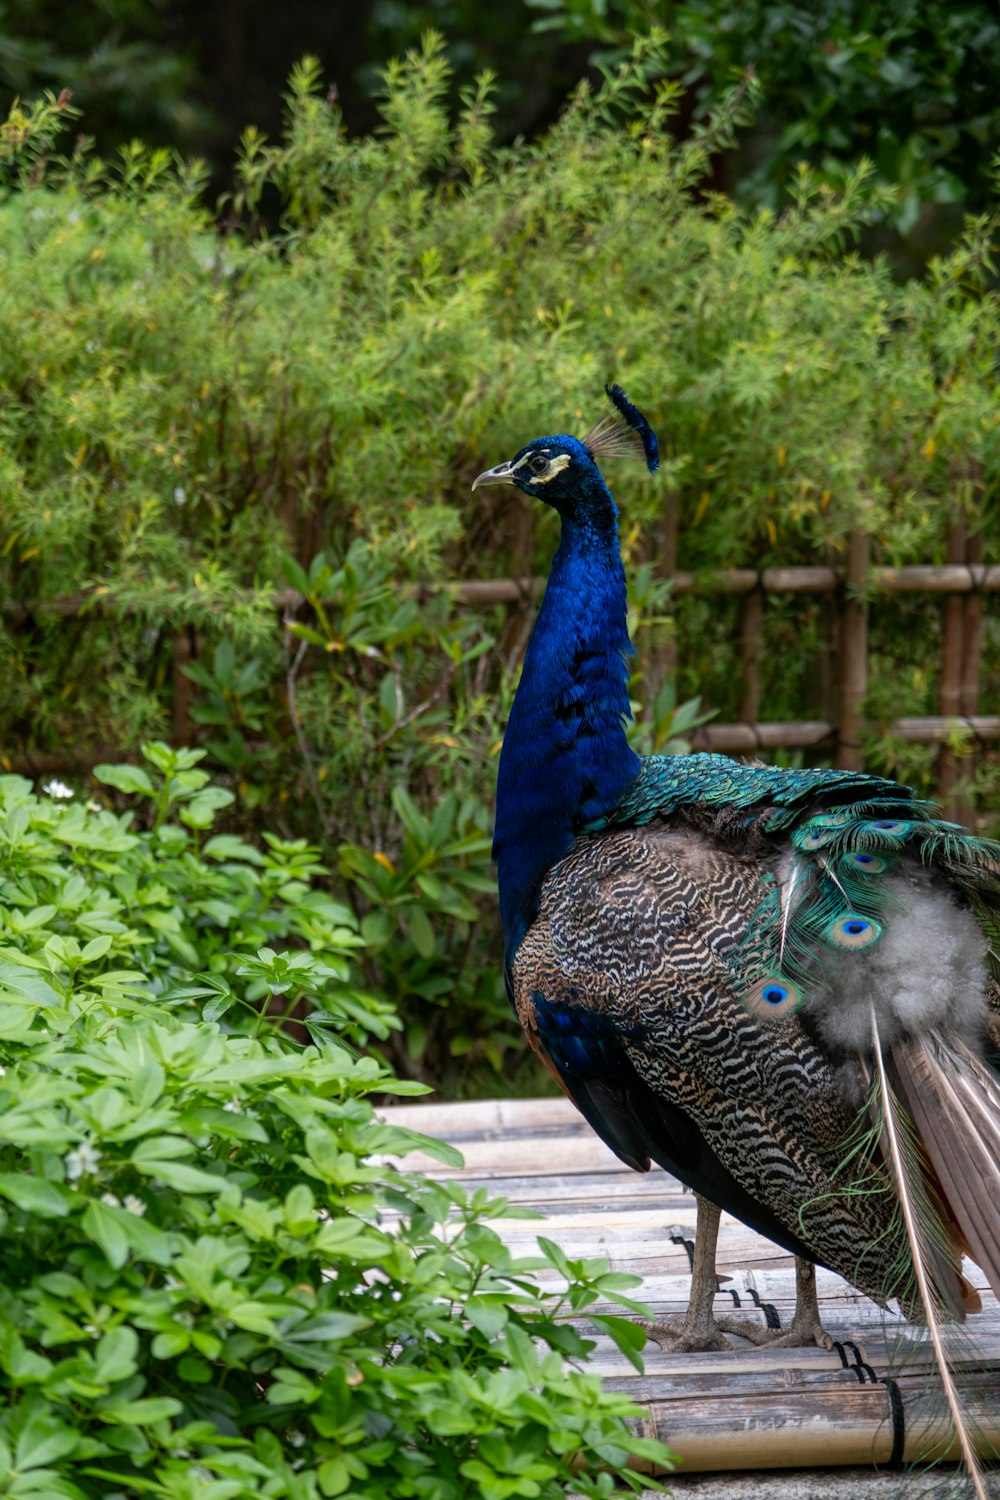 a peacock standing on top of a wooden platform